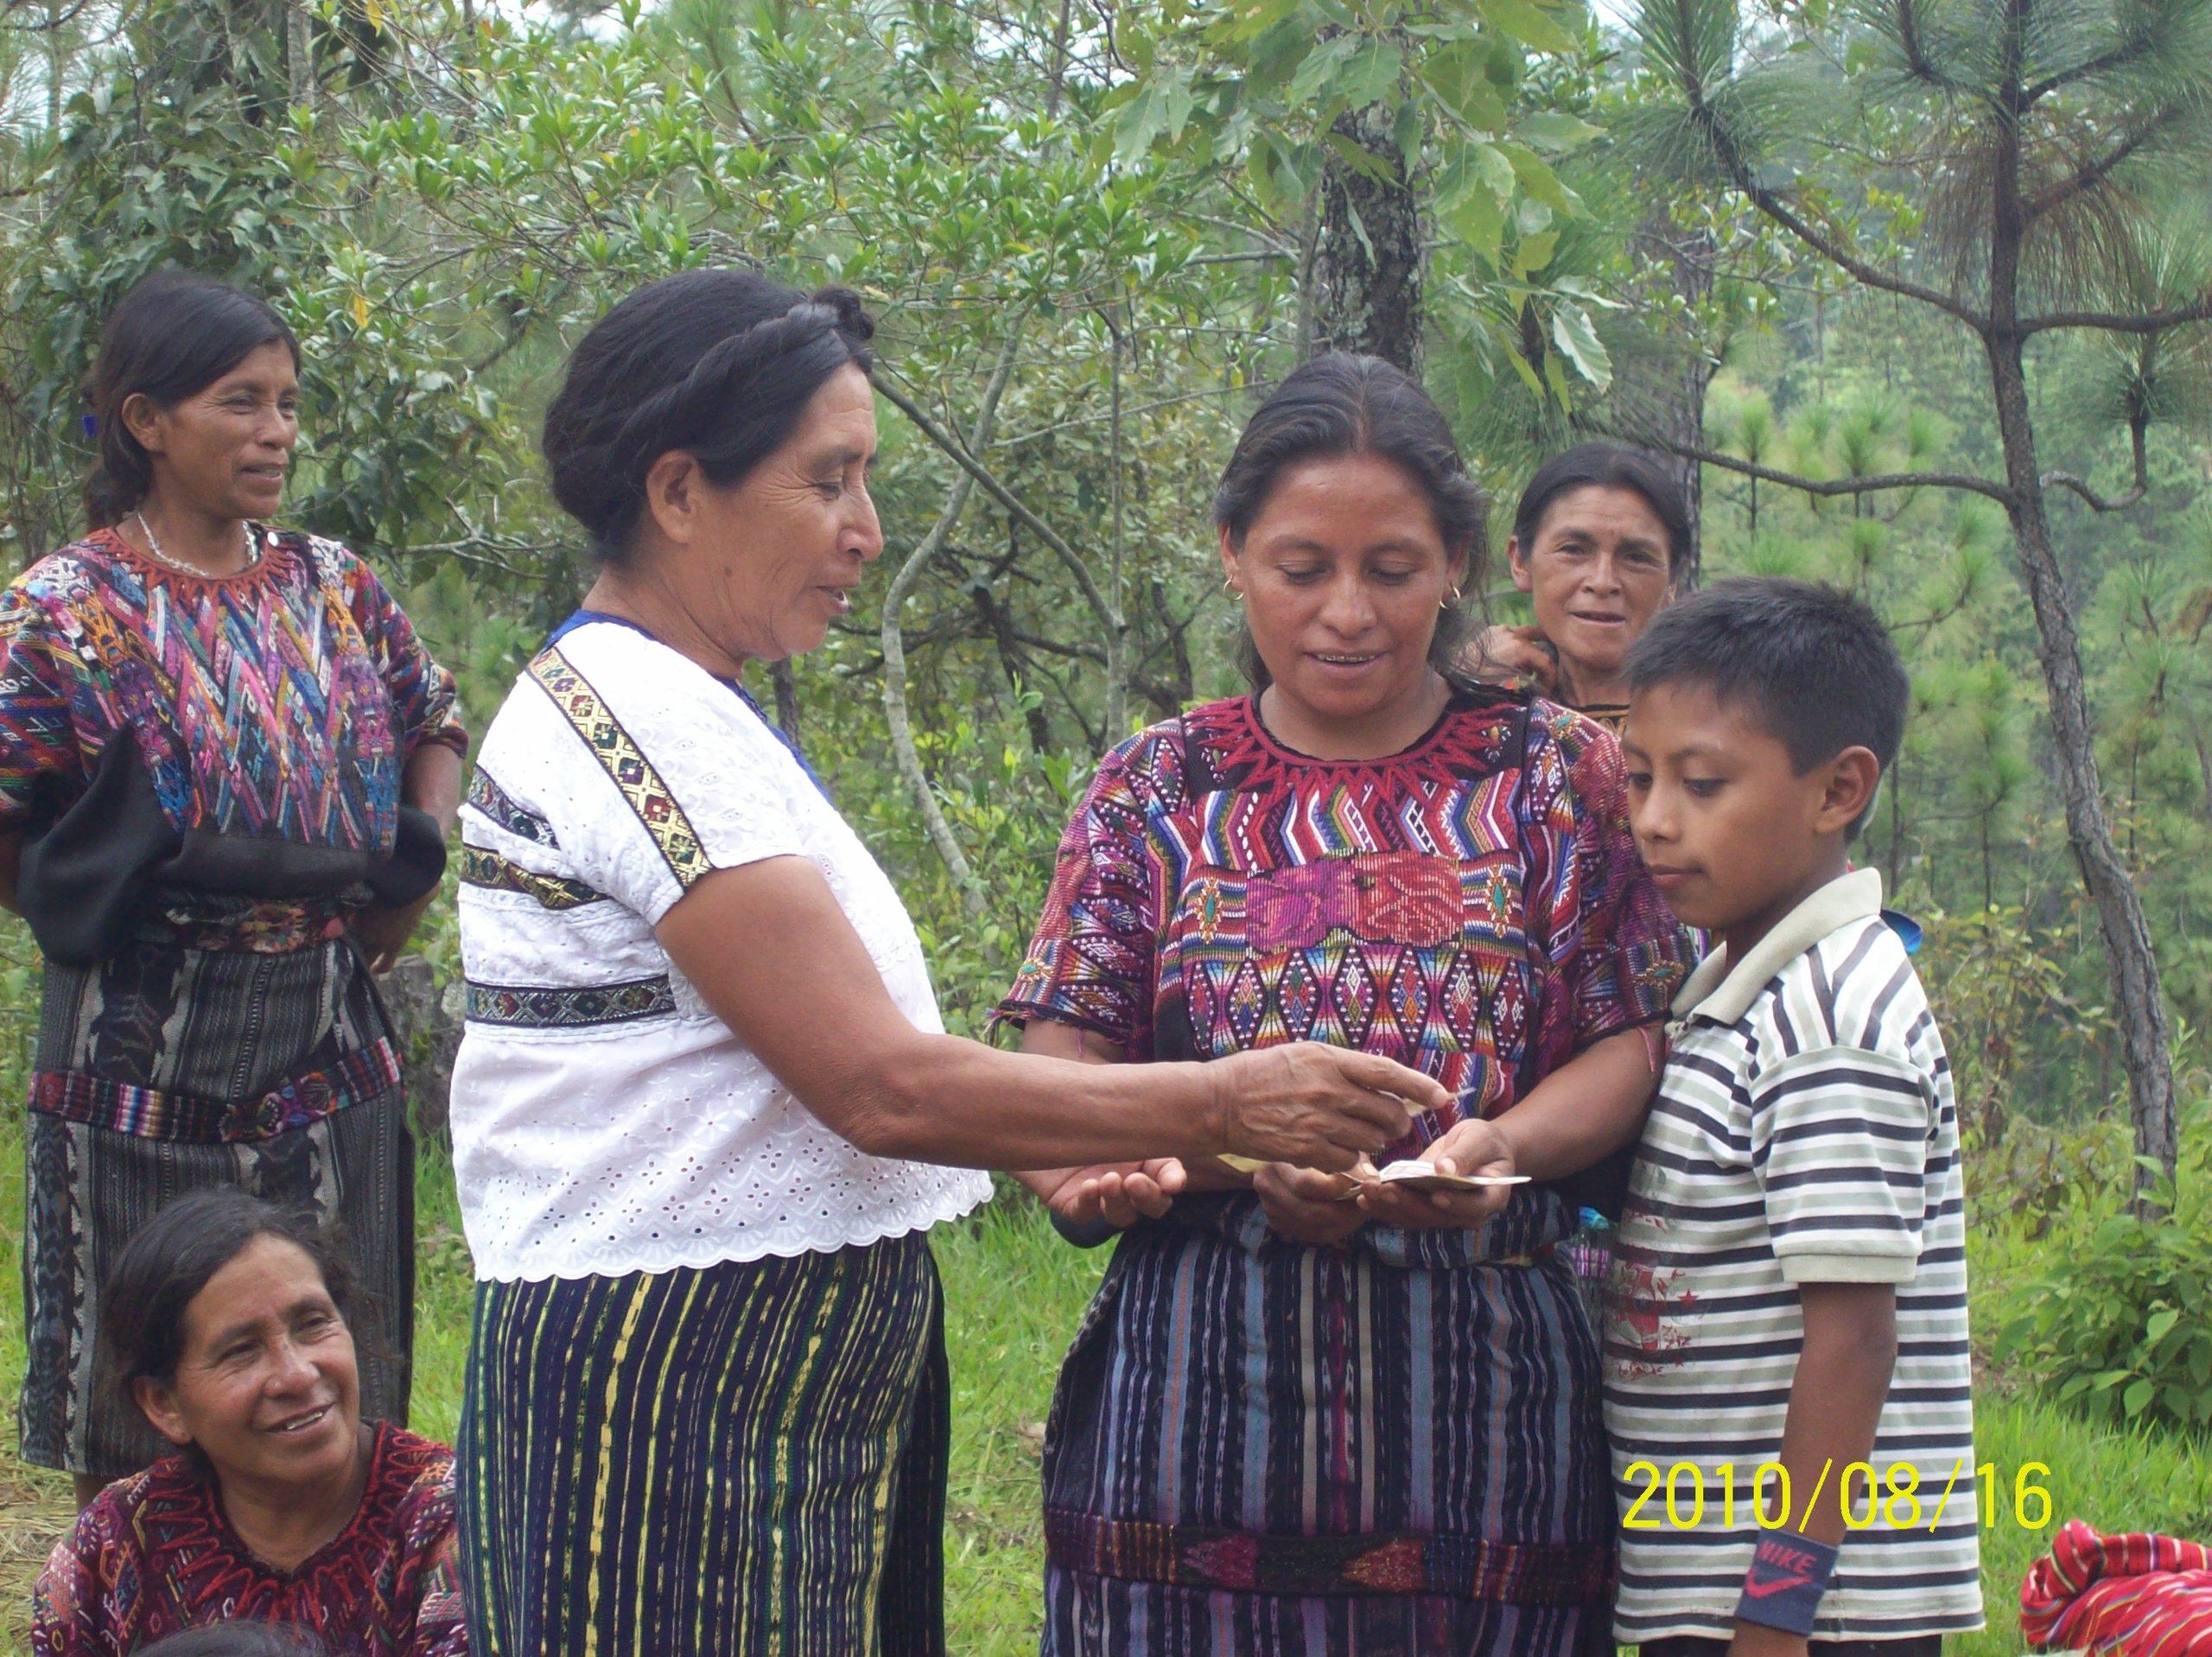 Photograph of a woman handing another woman a loan while her son looks on.